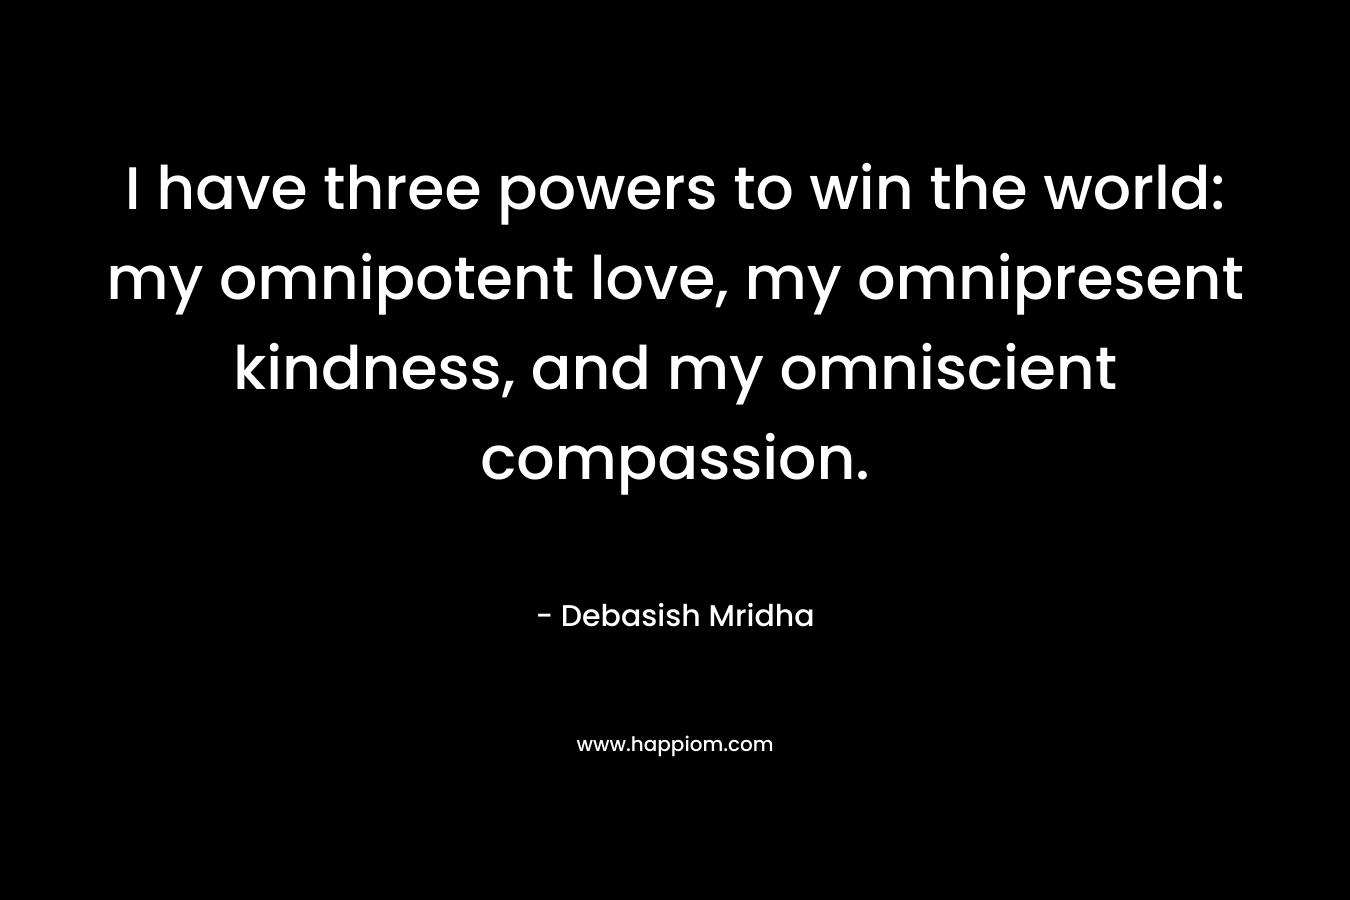 I have three powers to win the world: my omnipotent love, my omnipresent kindness, and my omniscient compassion.